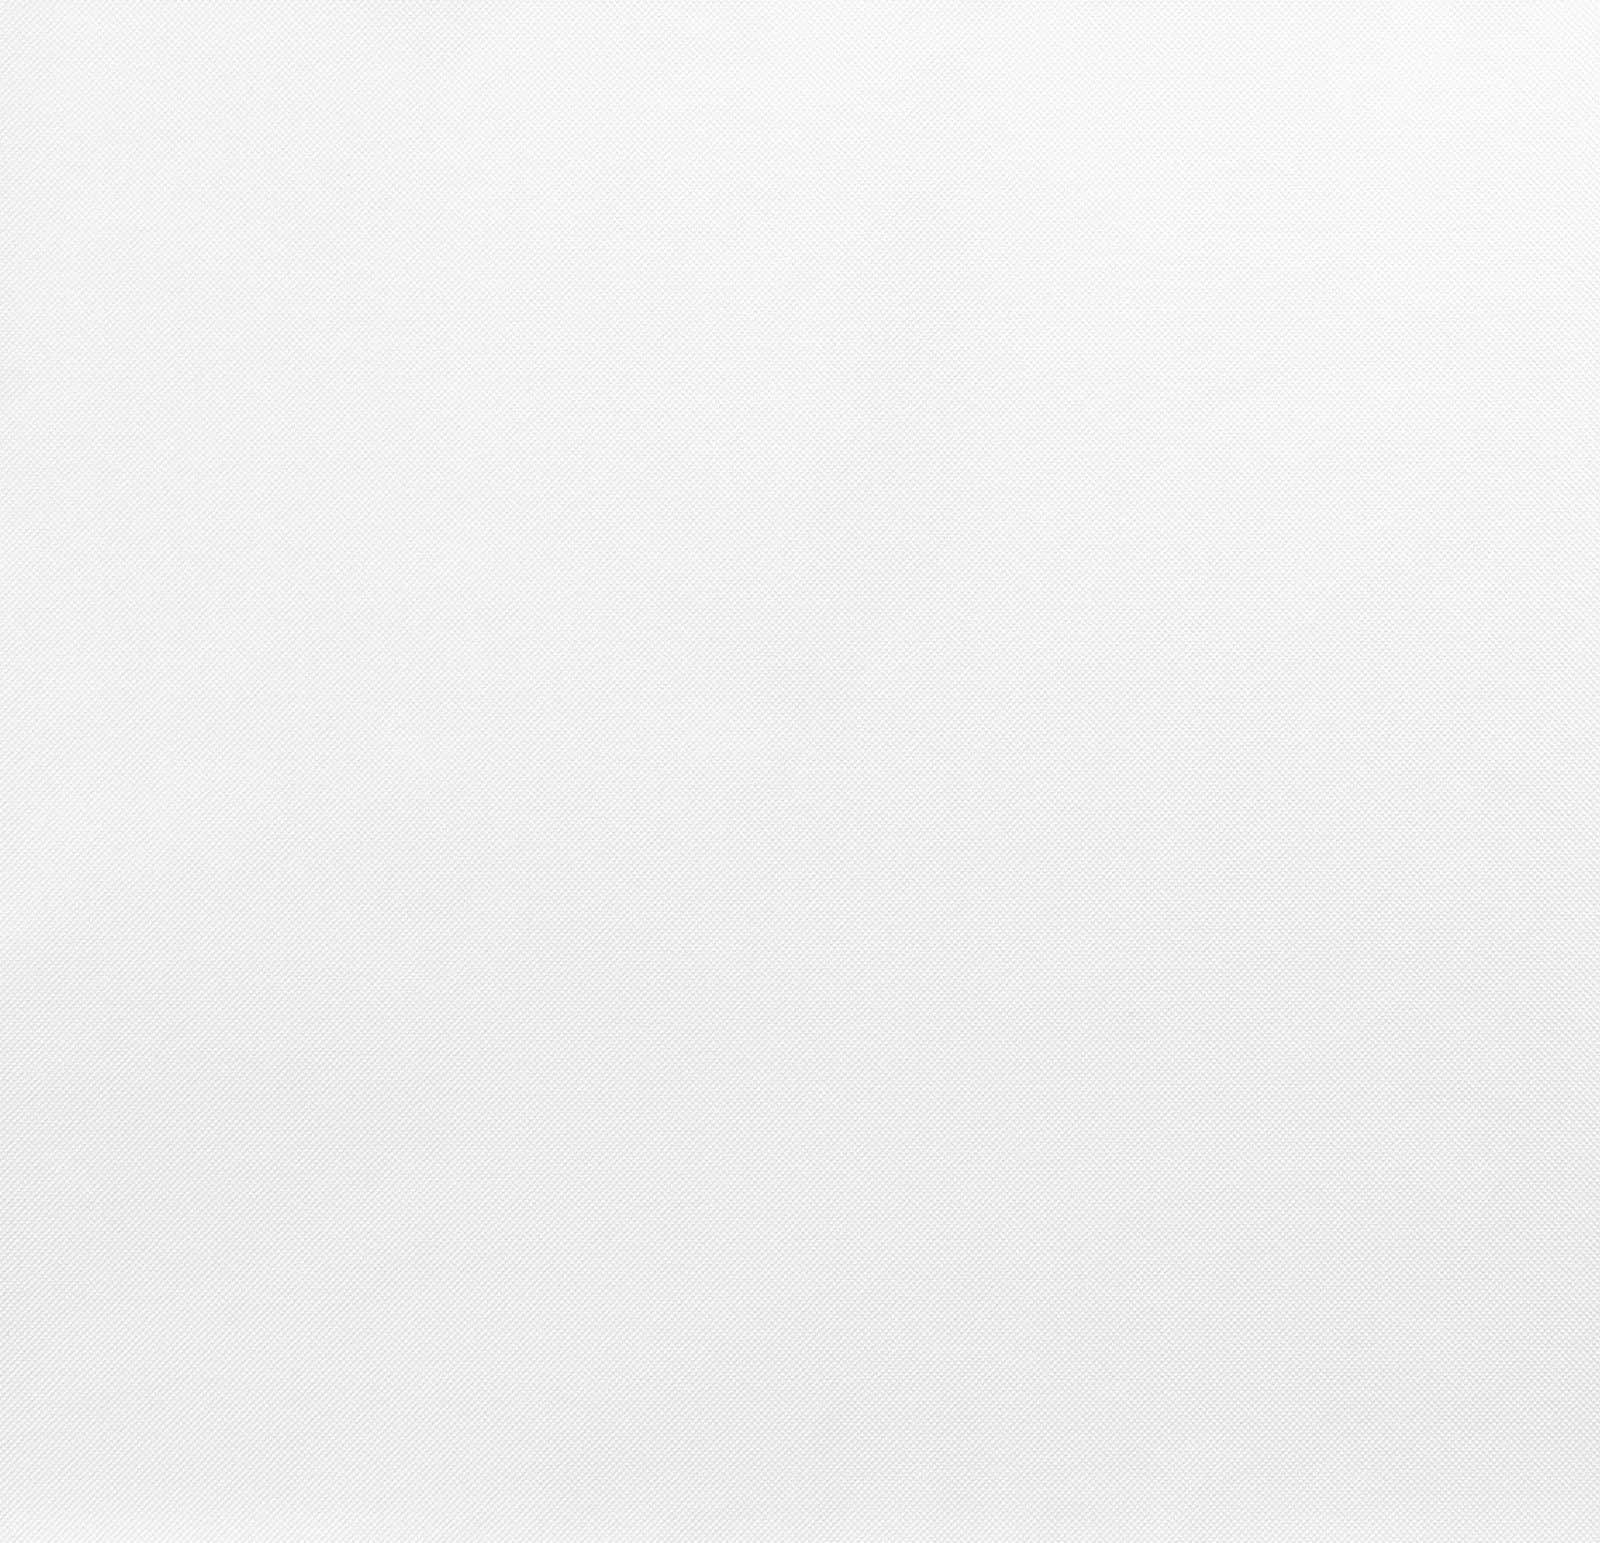 A beautiful and elegant solid white background